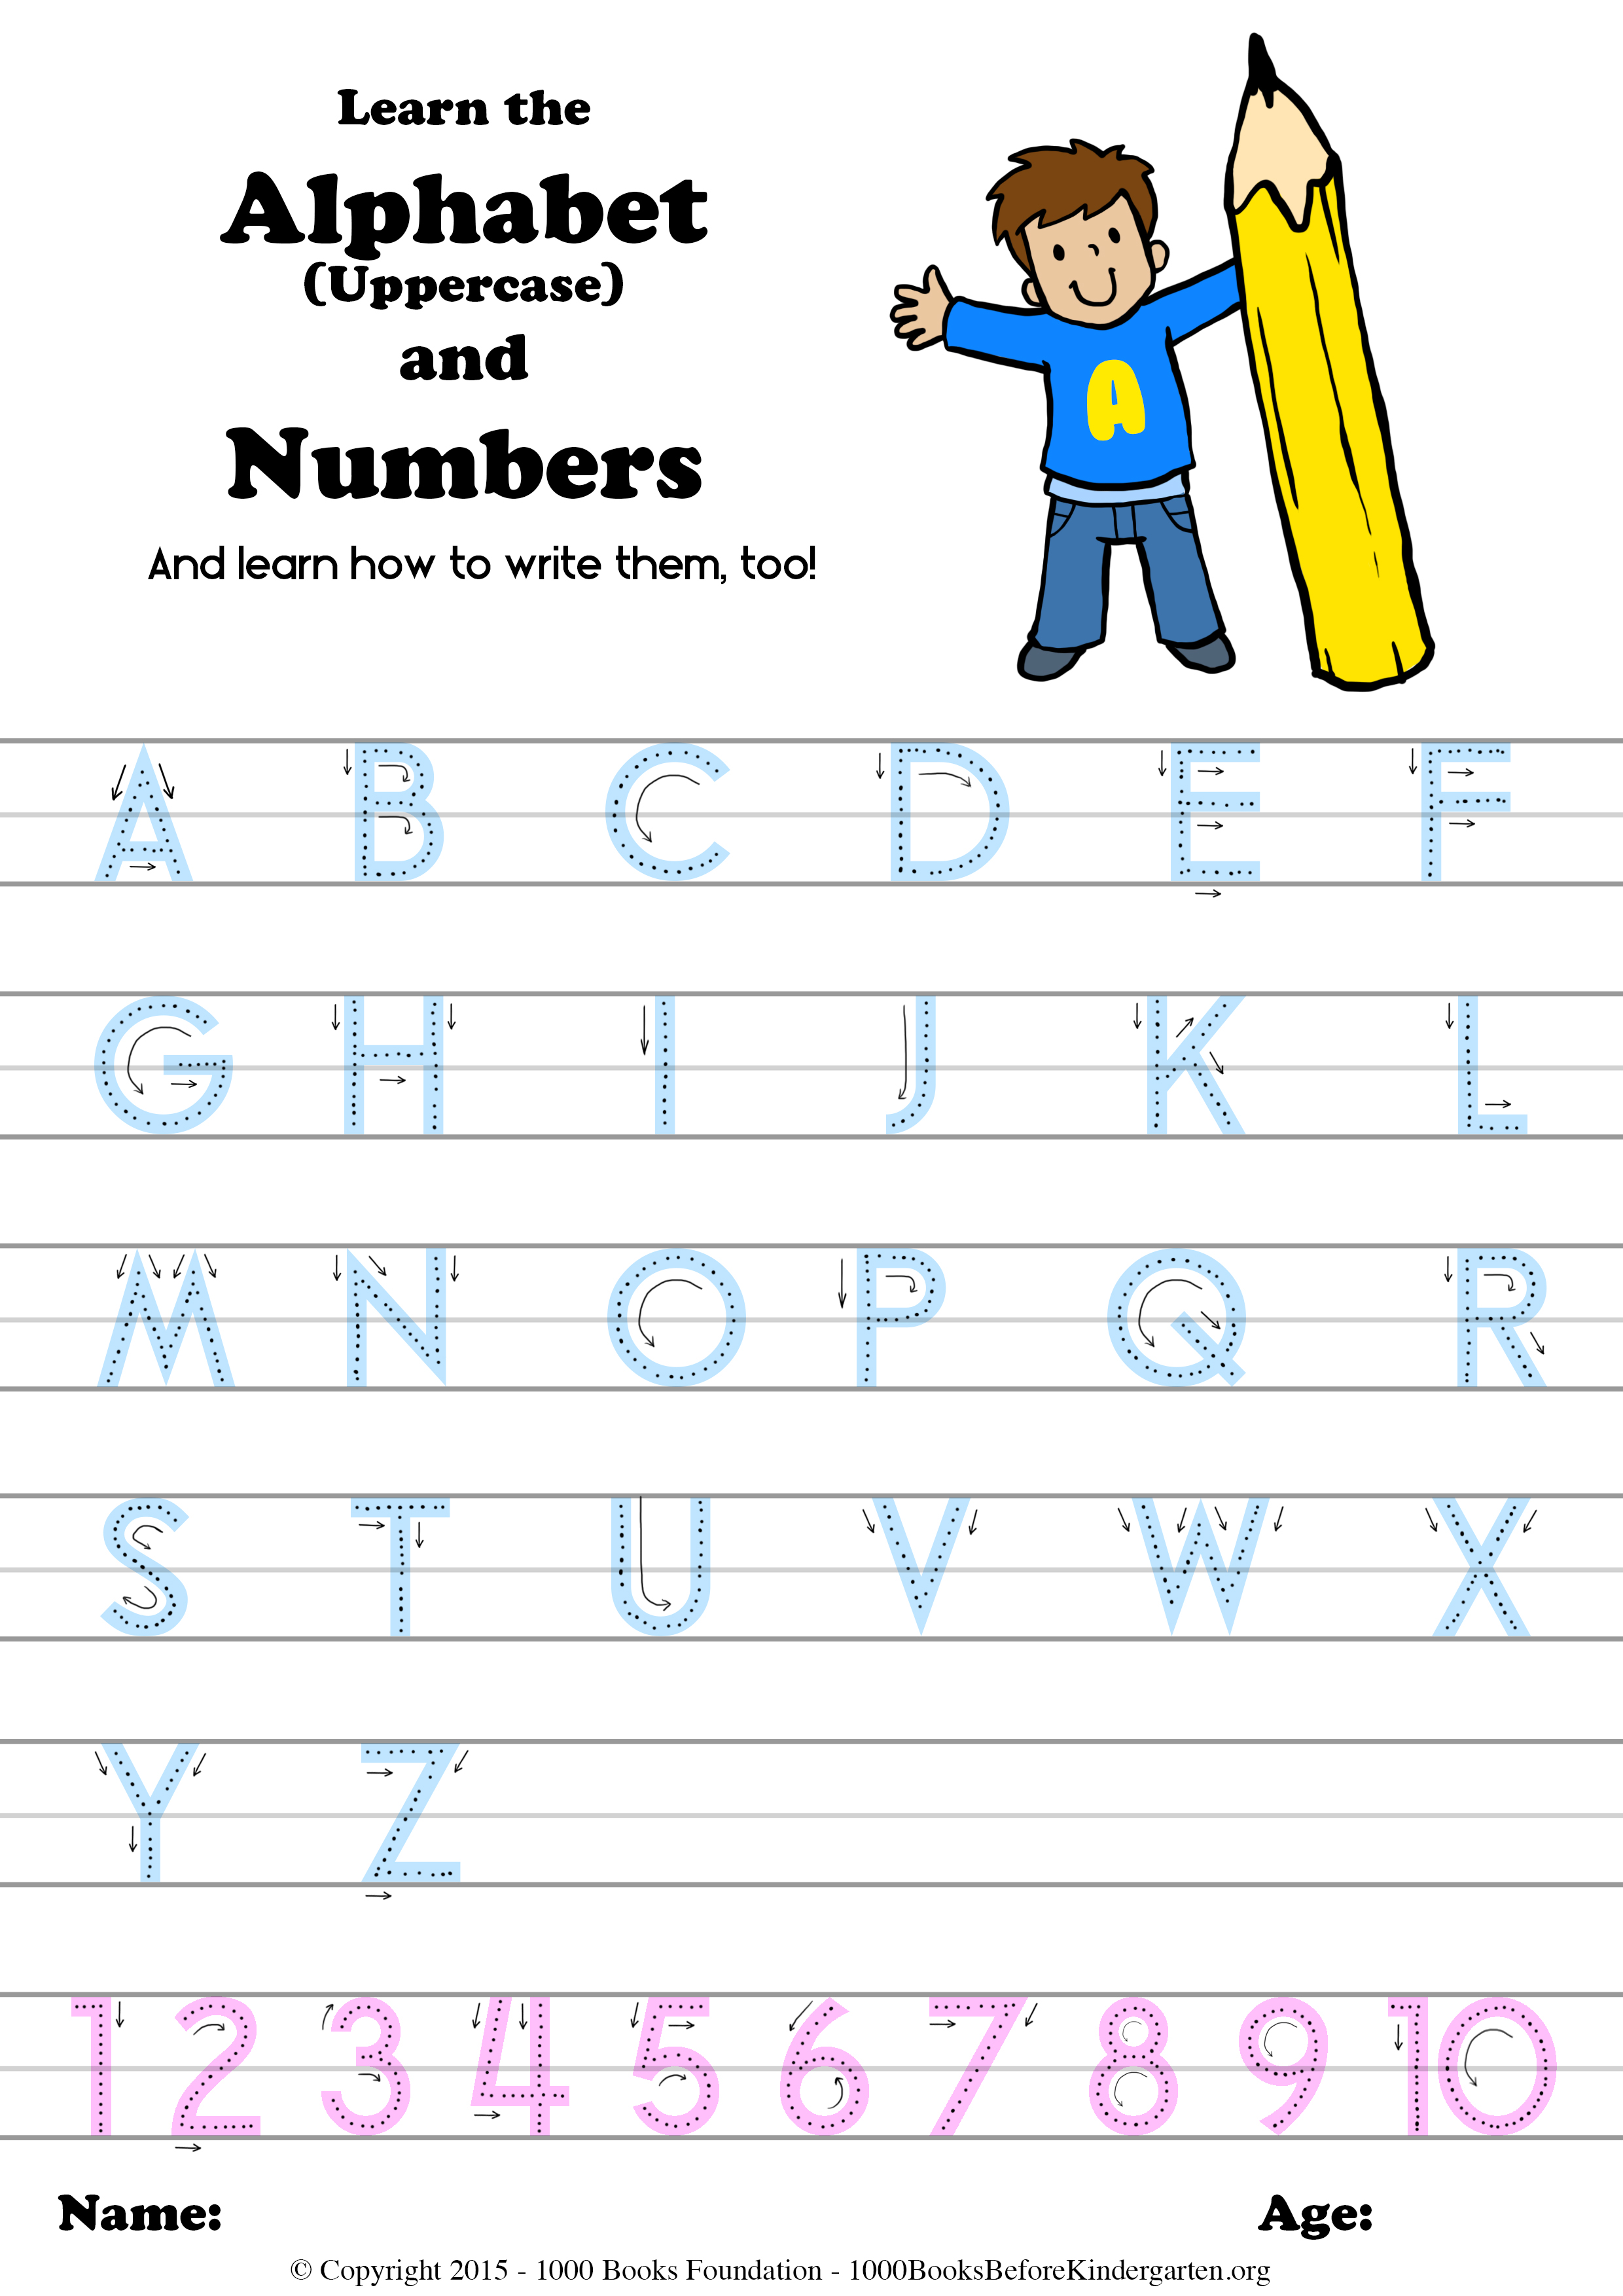 Learn the Alphabet & Numbers (and how to write them, too